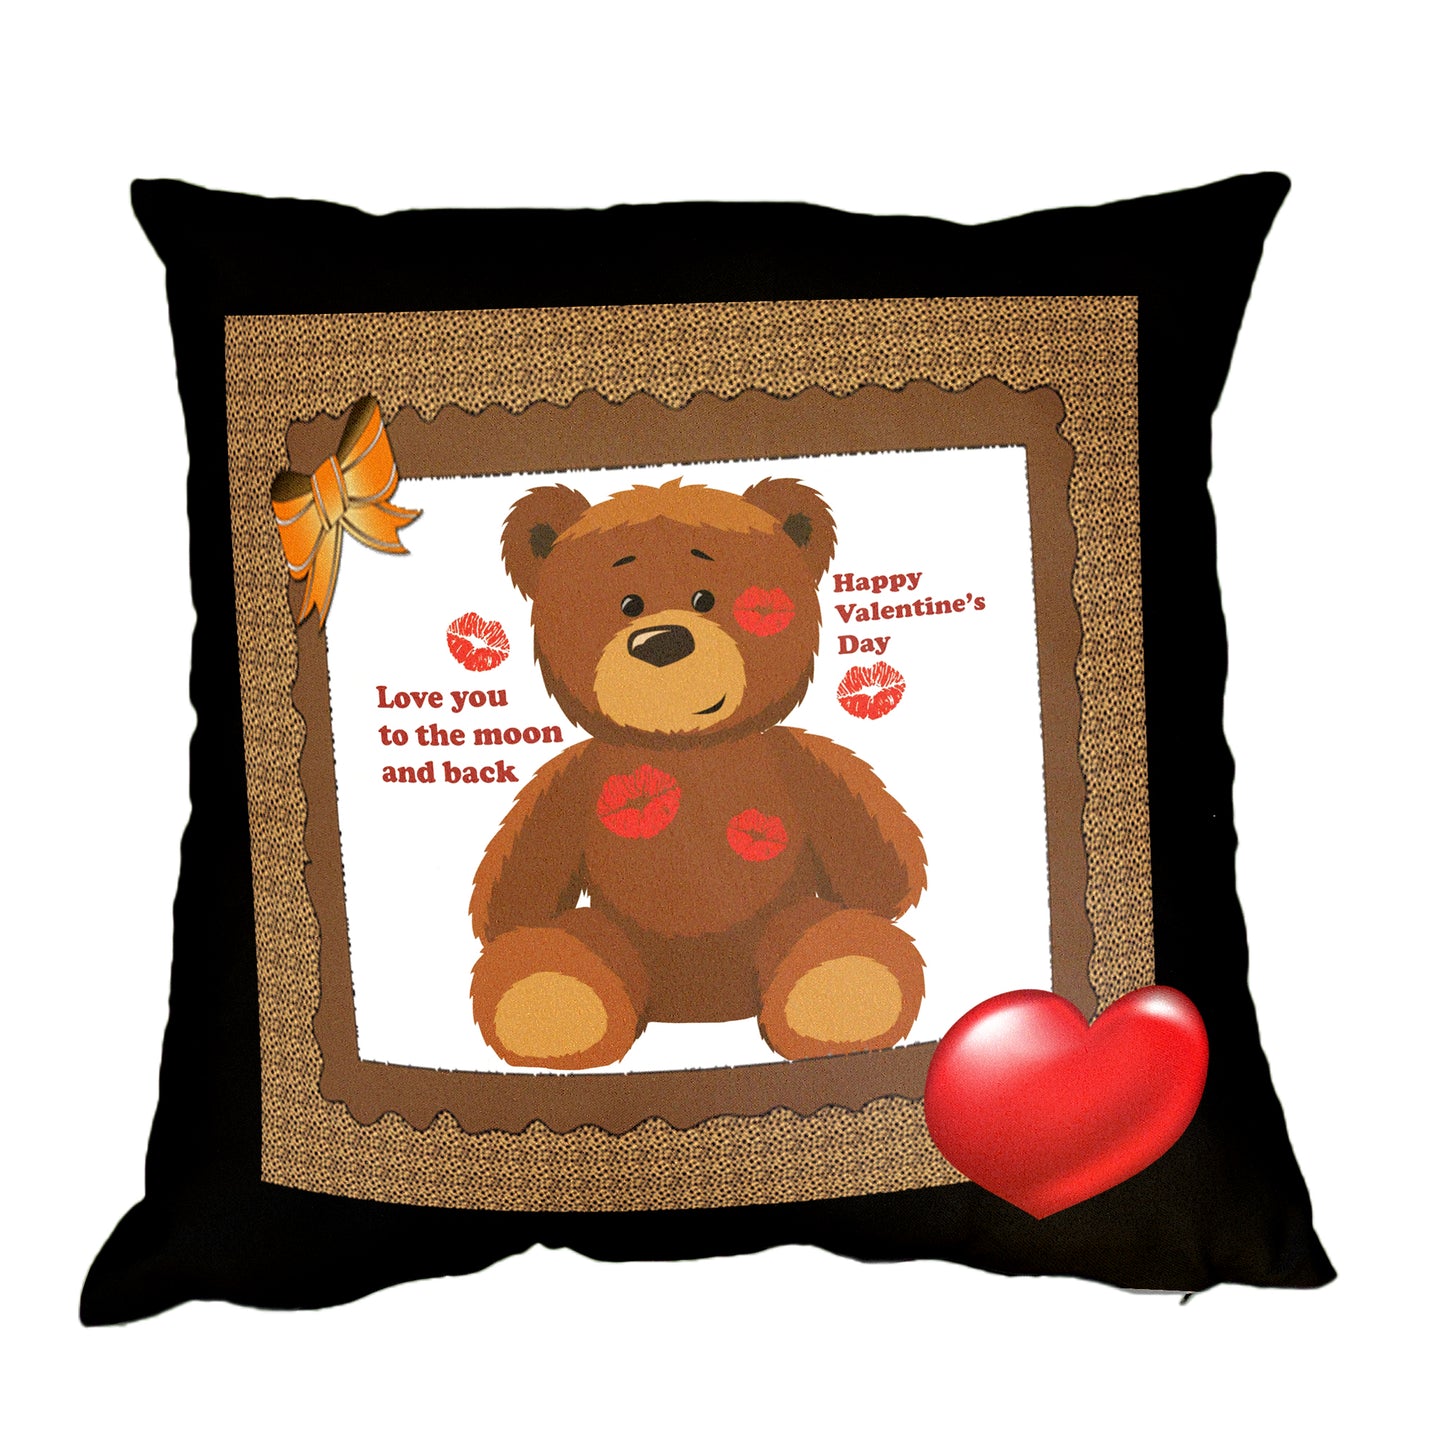 To the Moon and Back Valentine's Scatter Cushion